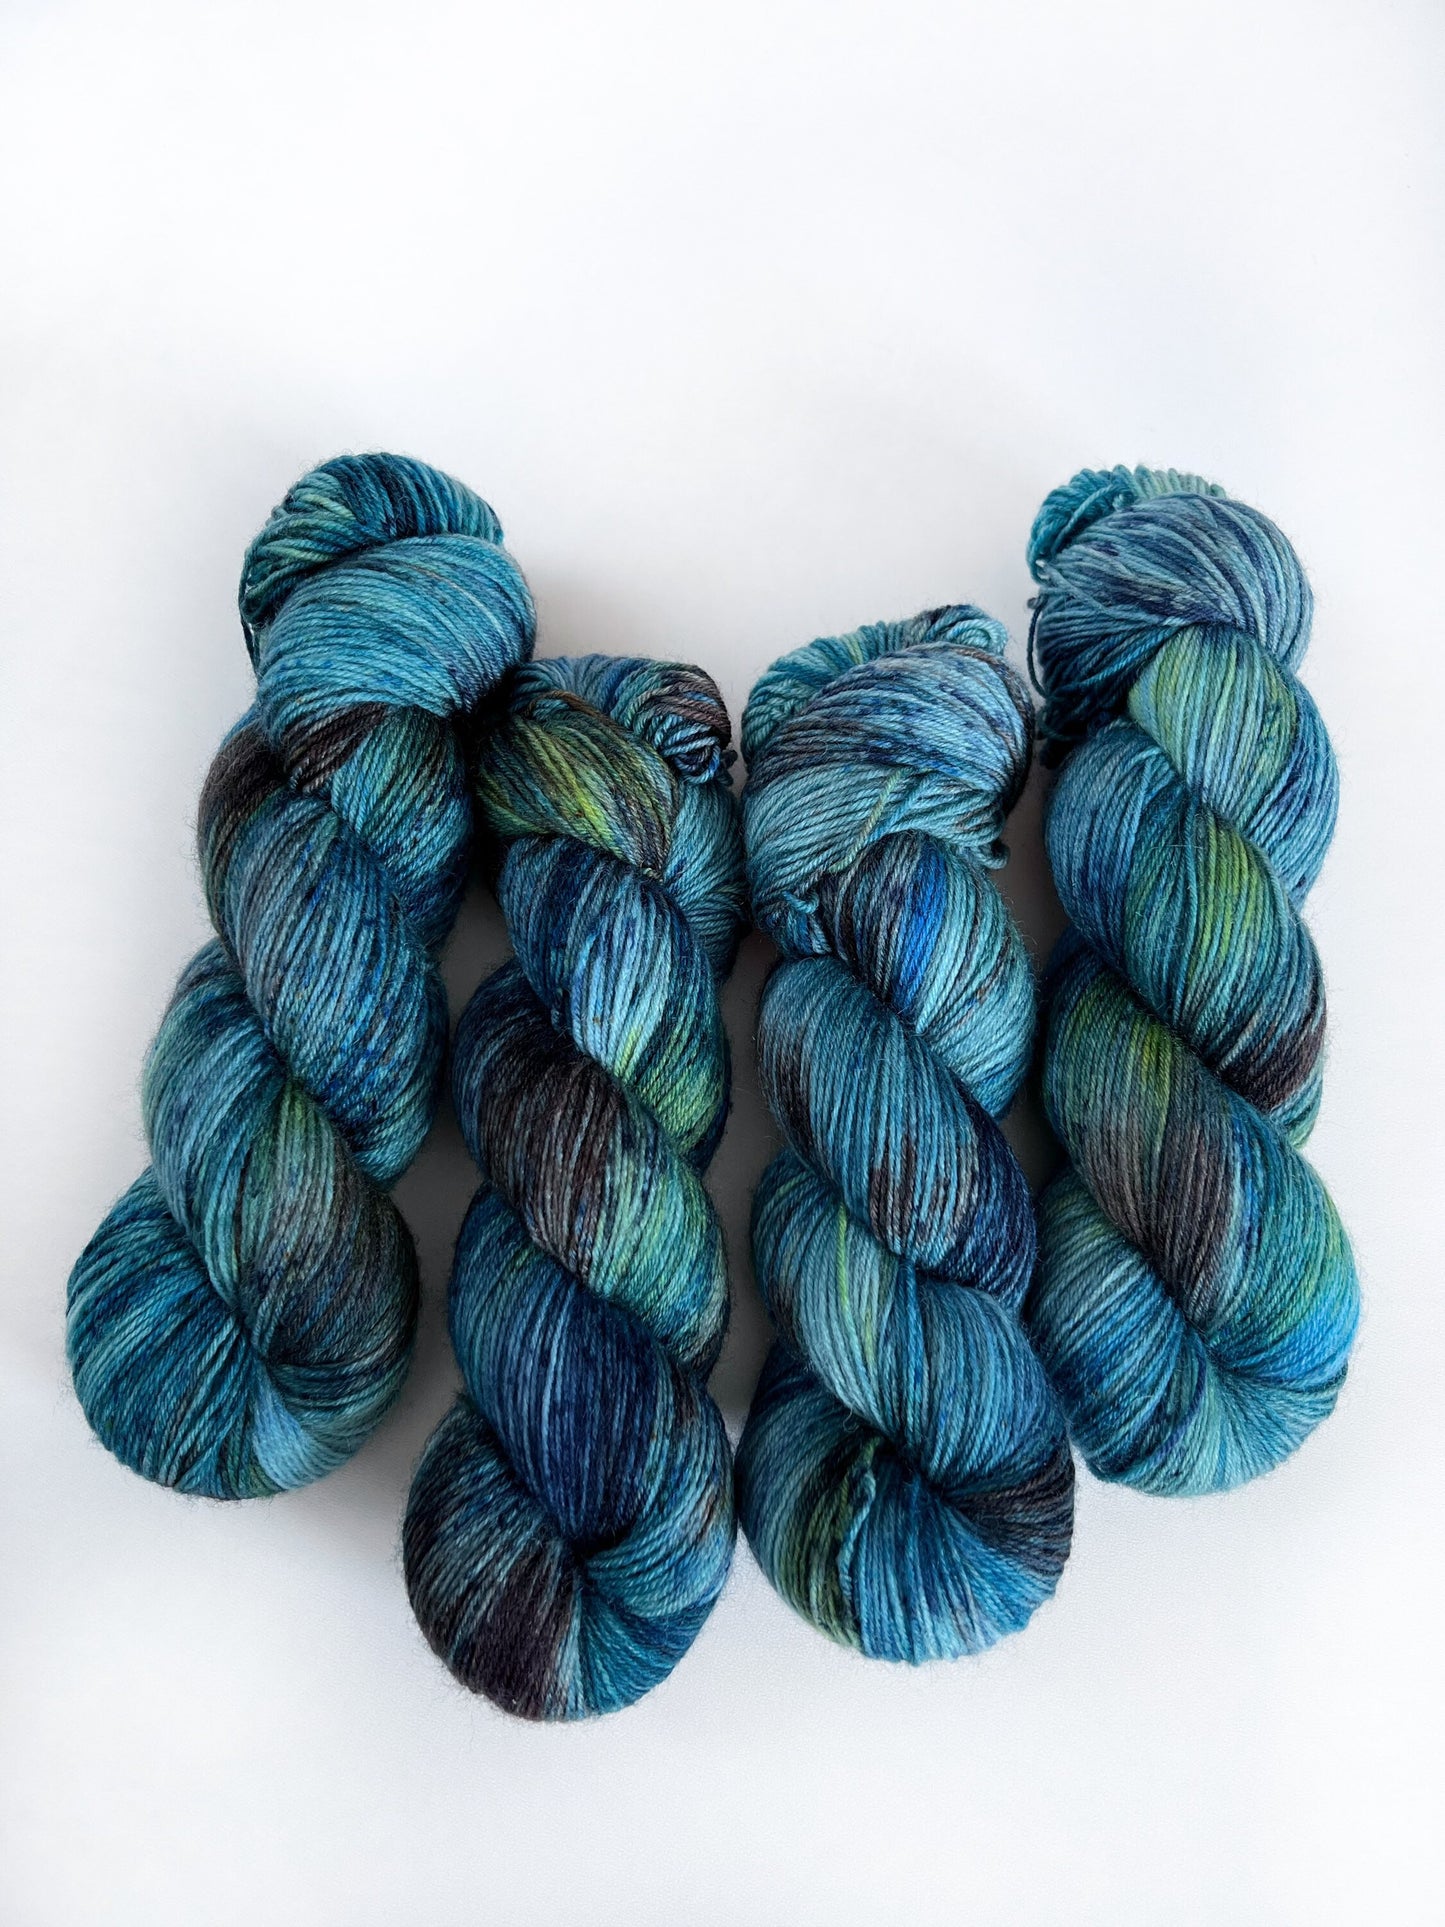 THE WORLD IS YOUR OYSTER - Teal Blue Green Grey Brown Speckled SUS or Worsted